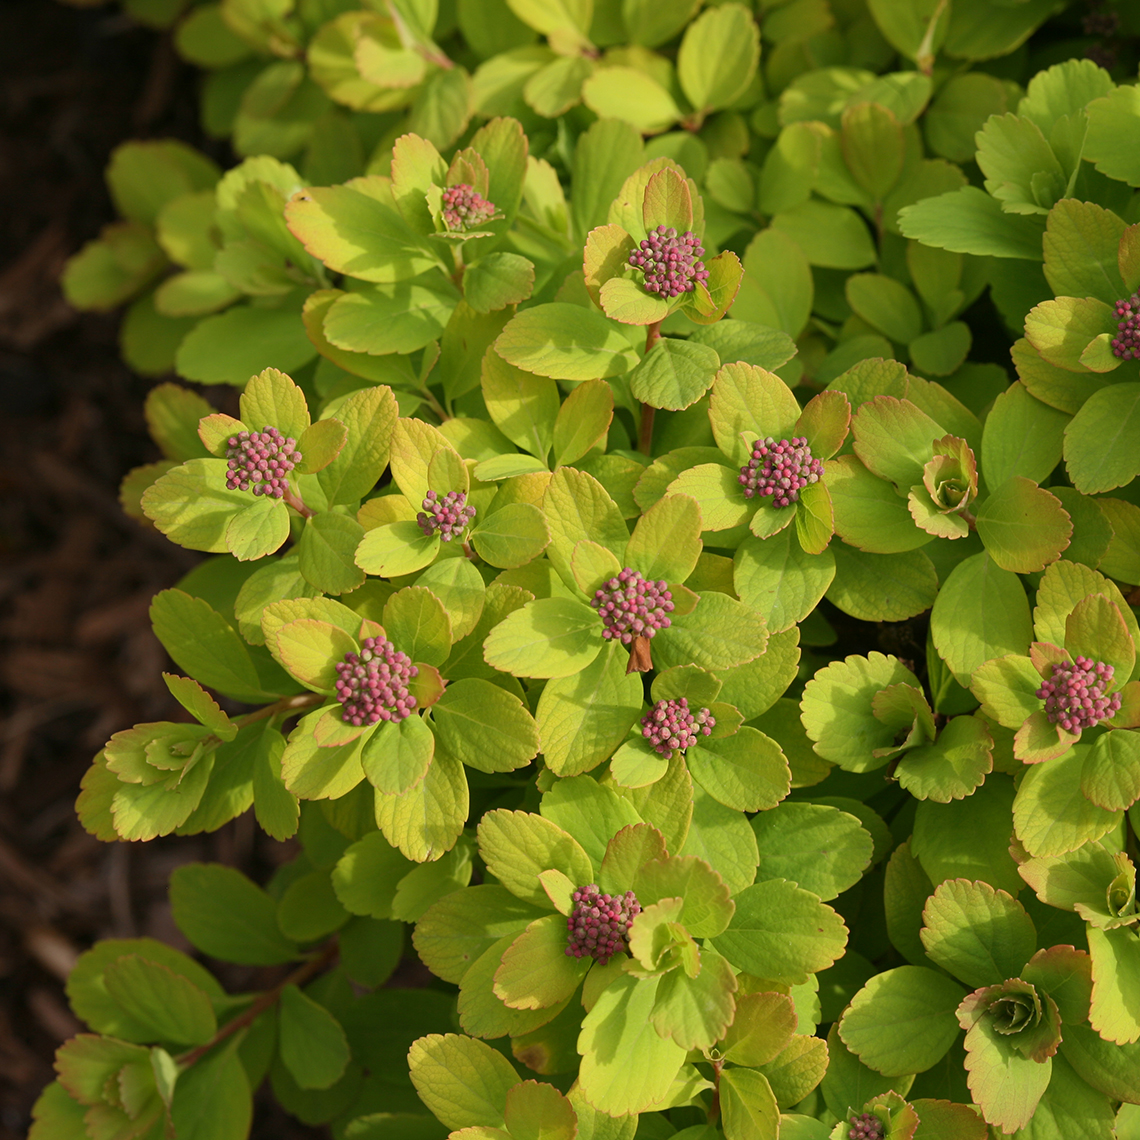 Close up of pink flower buds and rounded lime green foliage of Glow Girl Spiraea